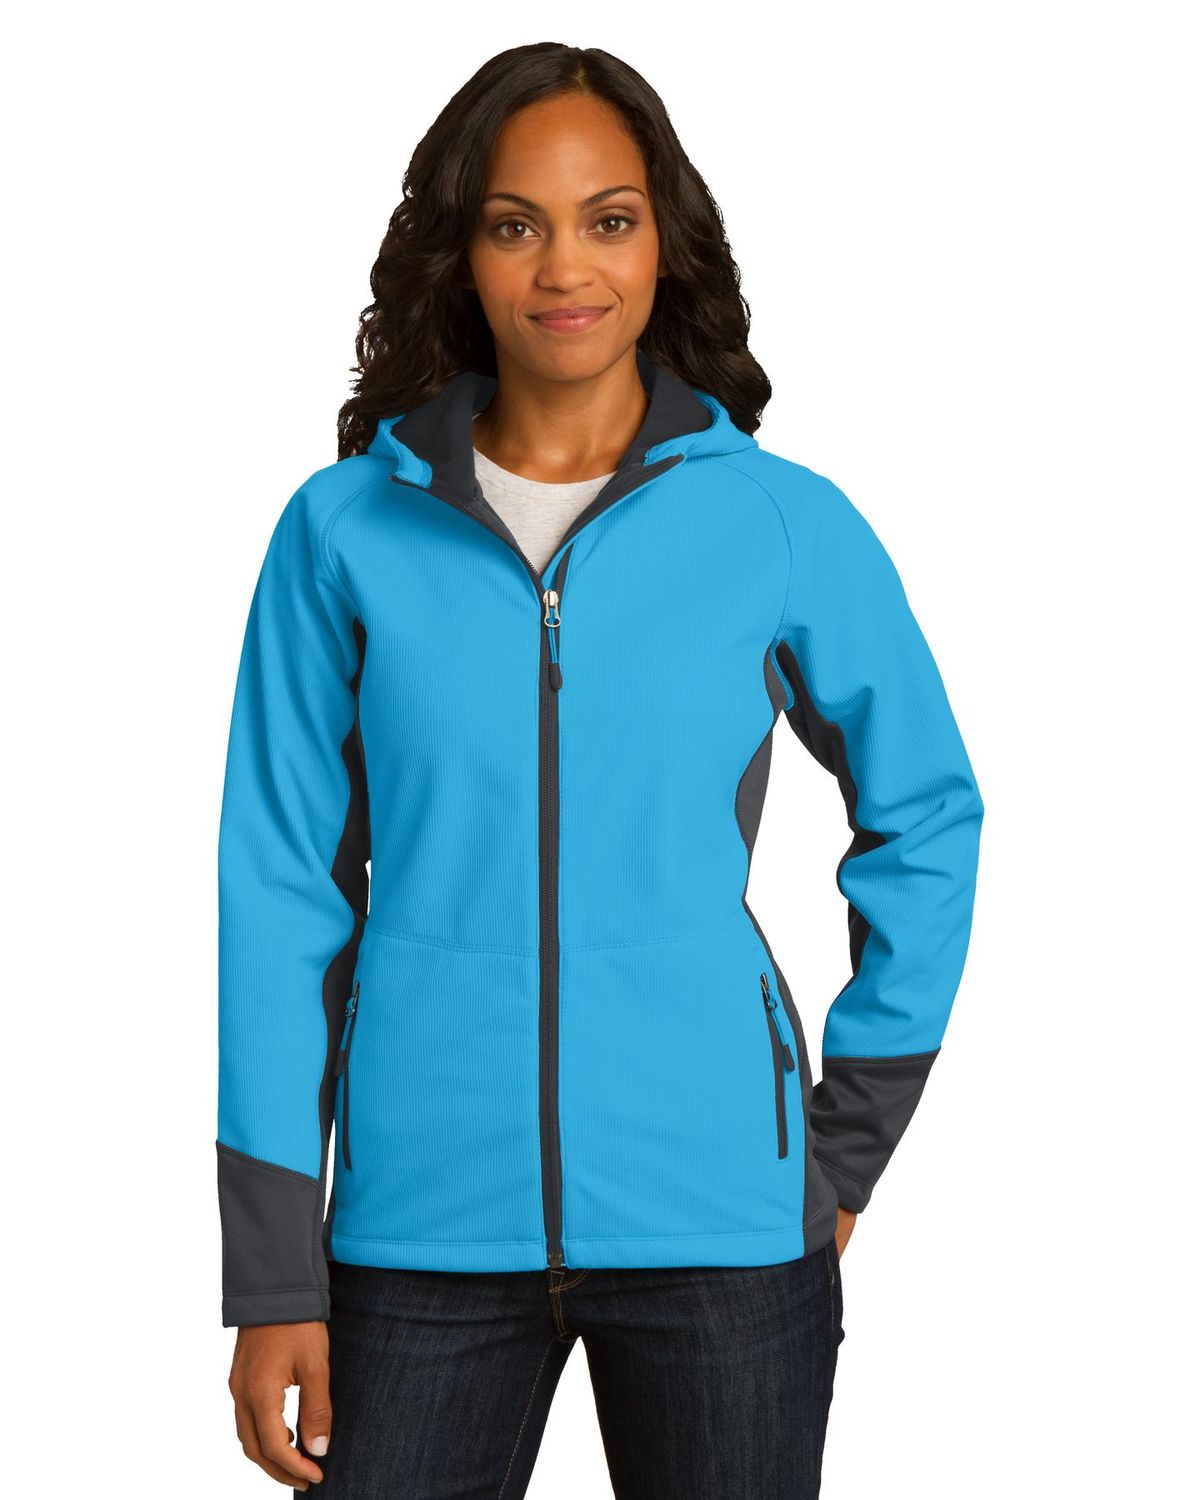 'Port Authority L319 Ladies Vertical Hooded Soft Shell Jacket'